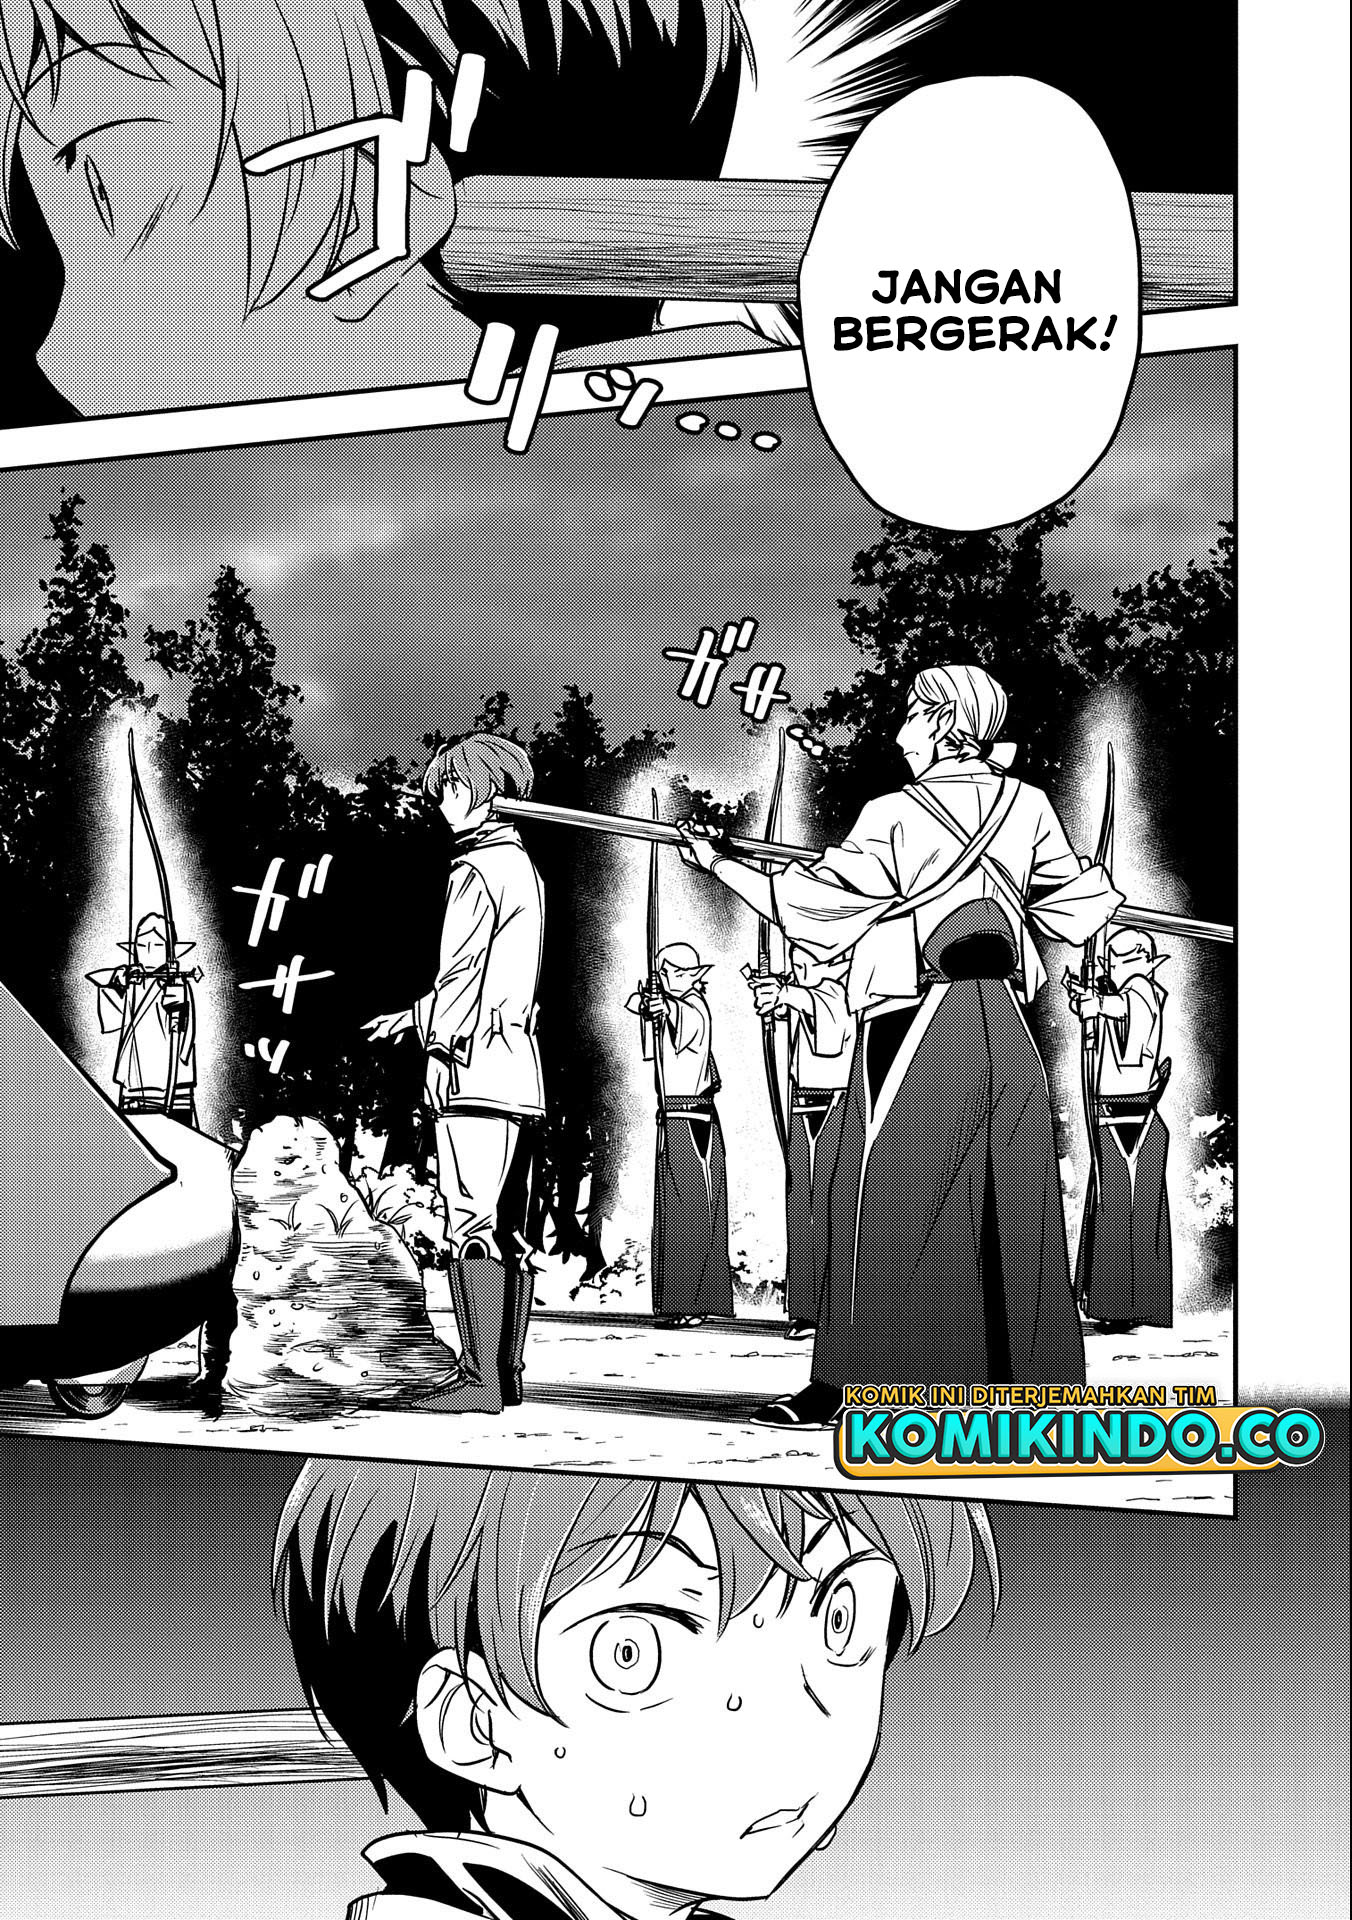 Villager A Wants to Save the Villainess no Matter What! Chapter 08